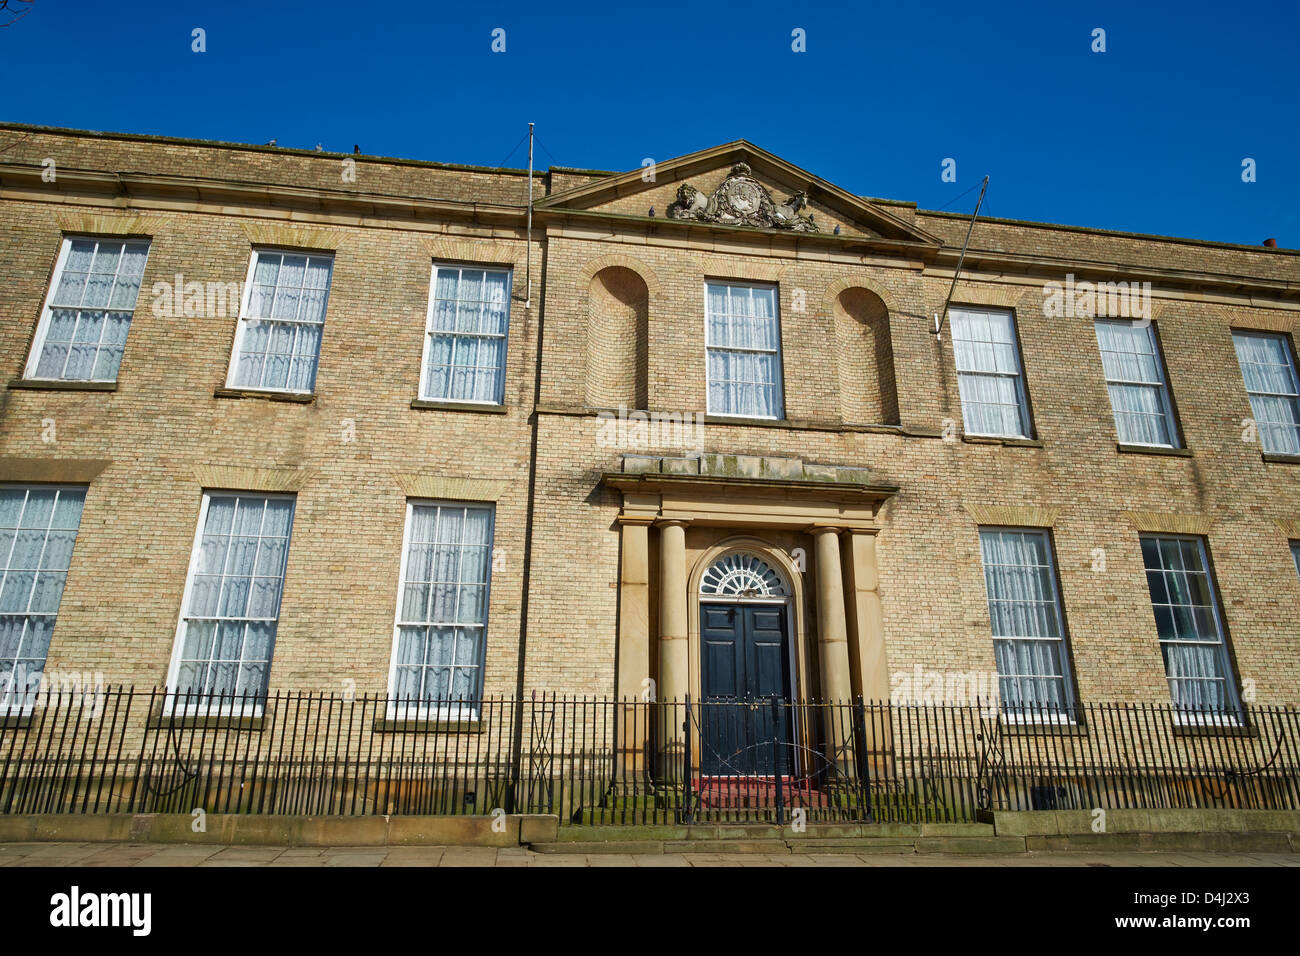 The Judges Lodgings popular for meetings and events Castle Hill Lincoln Lincolnshire England Stock Photo